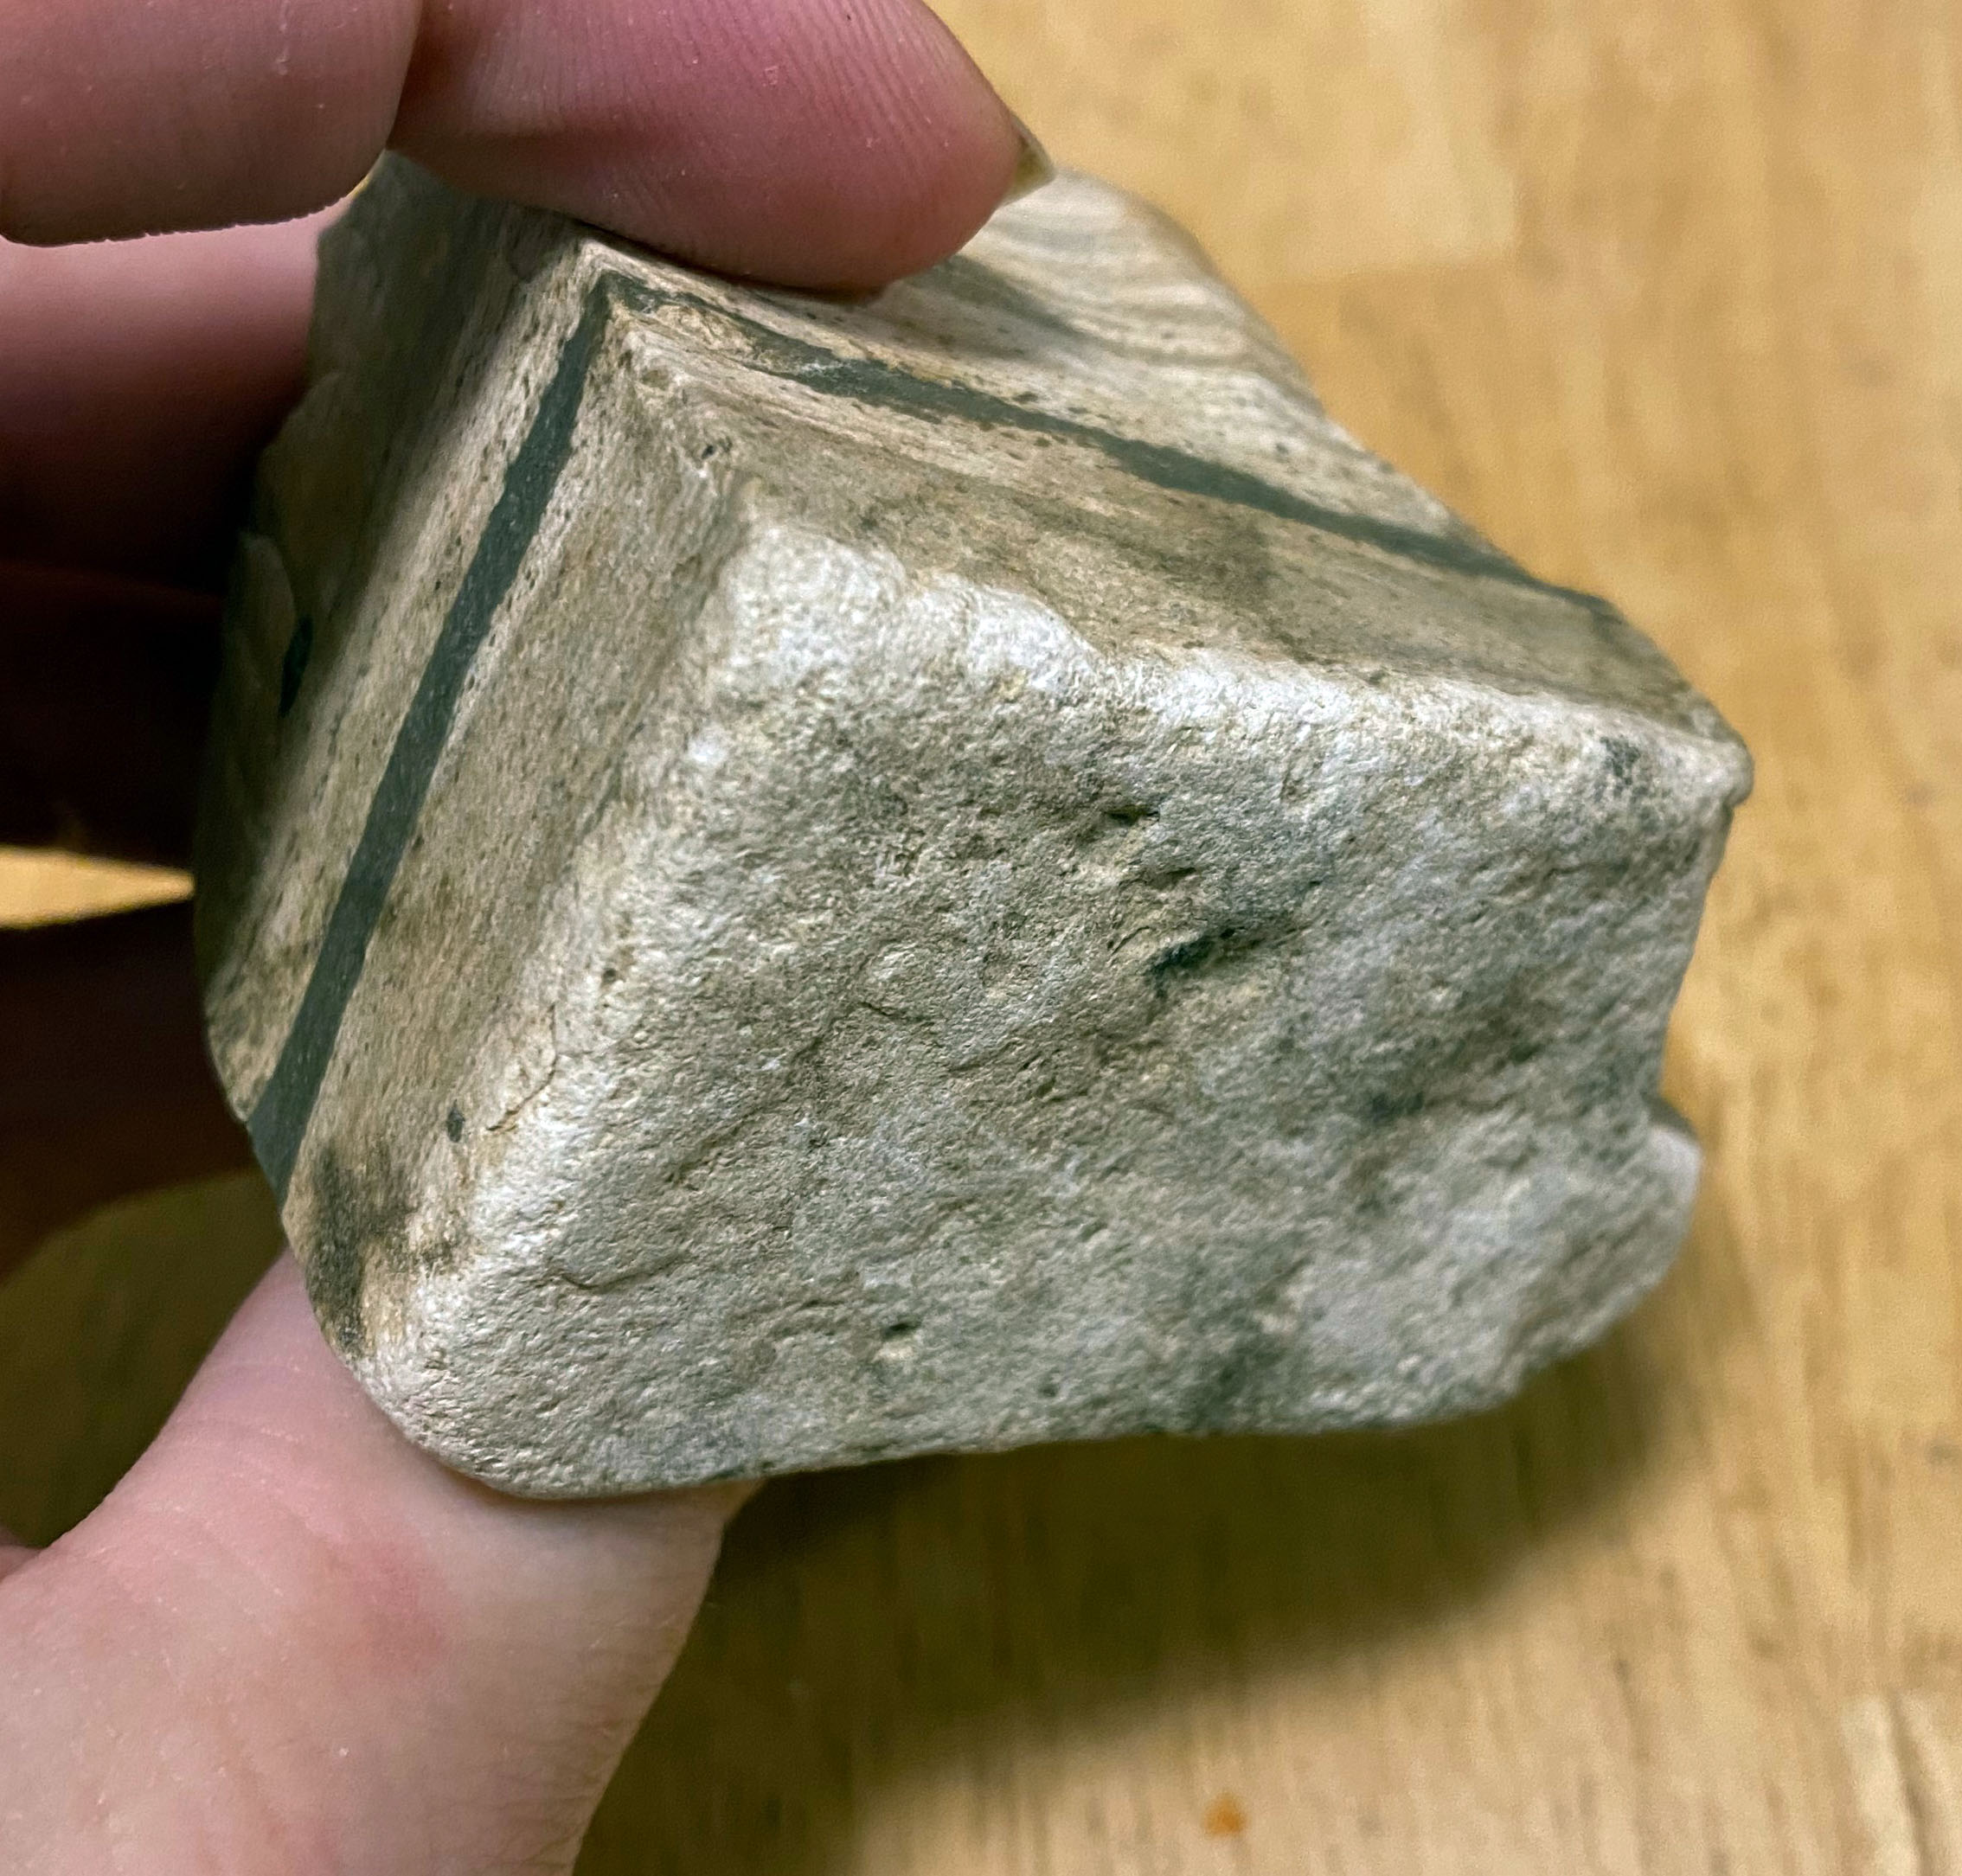 Another view of a rock irregularly cube-shaped, a couple inches on a side. White top and bottom with banding in various shades of gray and black, with one prominent black band.